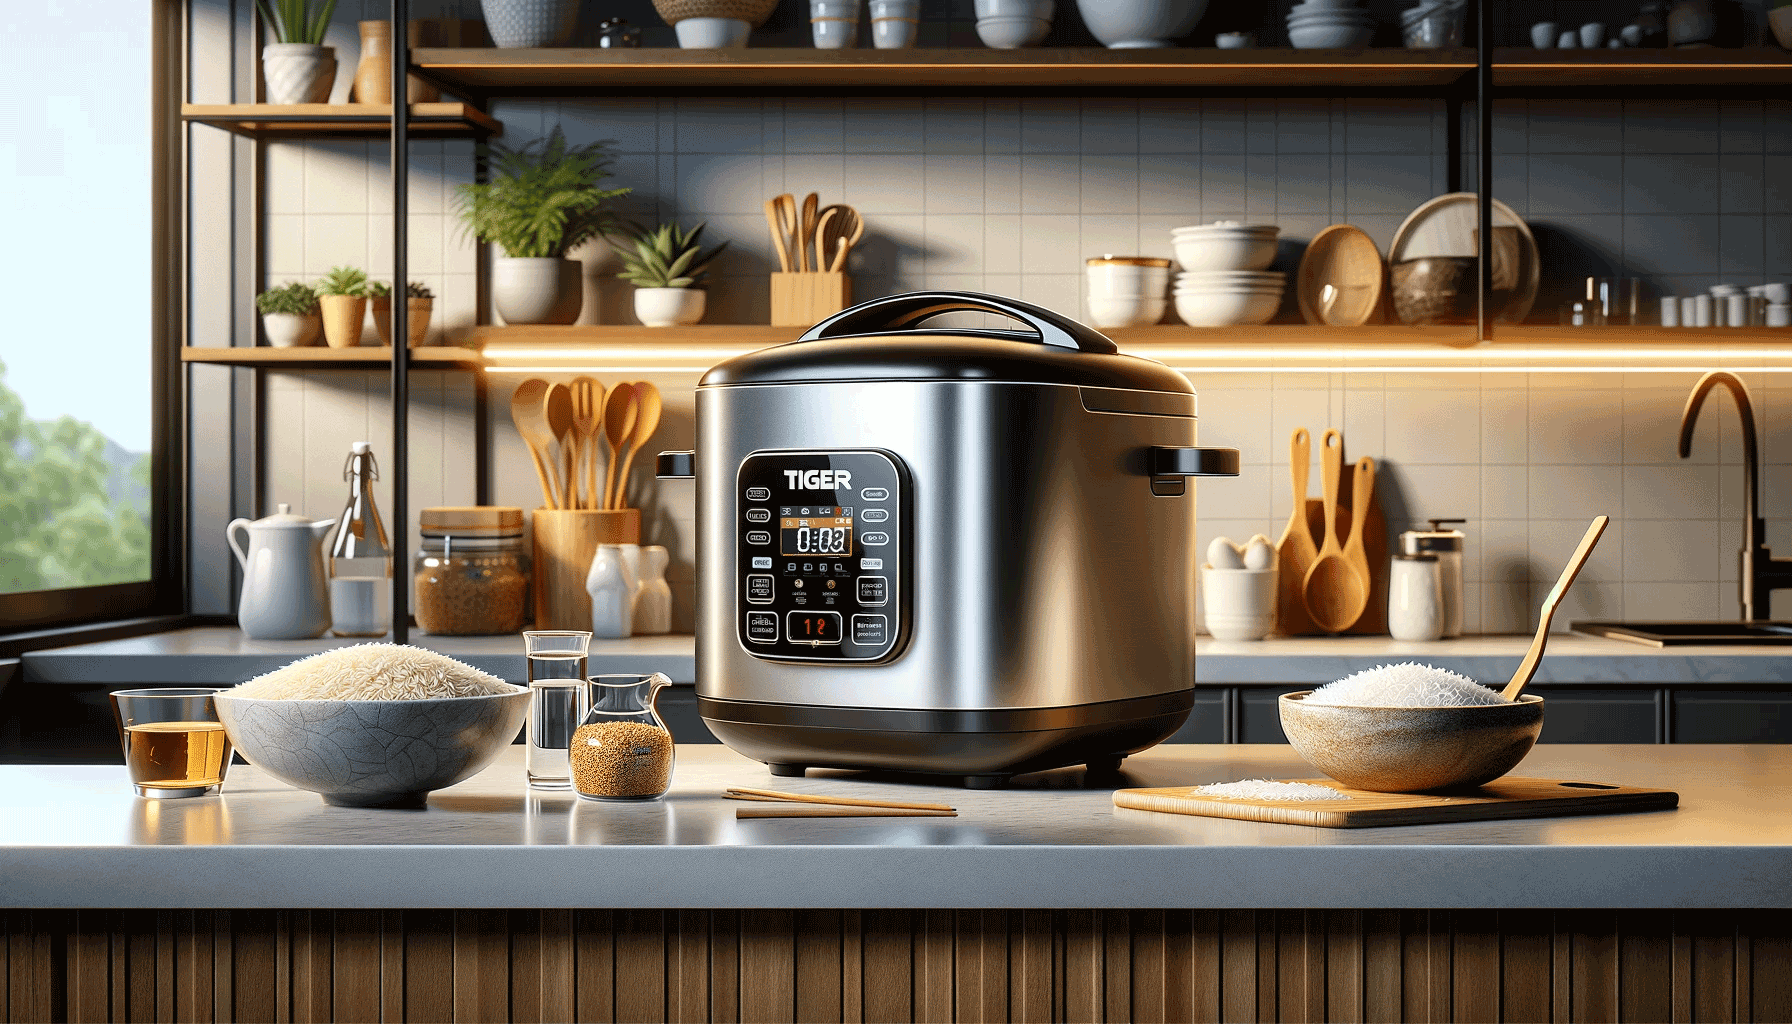 Tiger Rice Cooker A Kitchen Appliance Overview